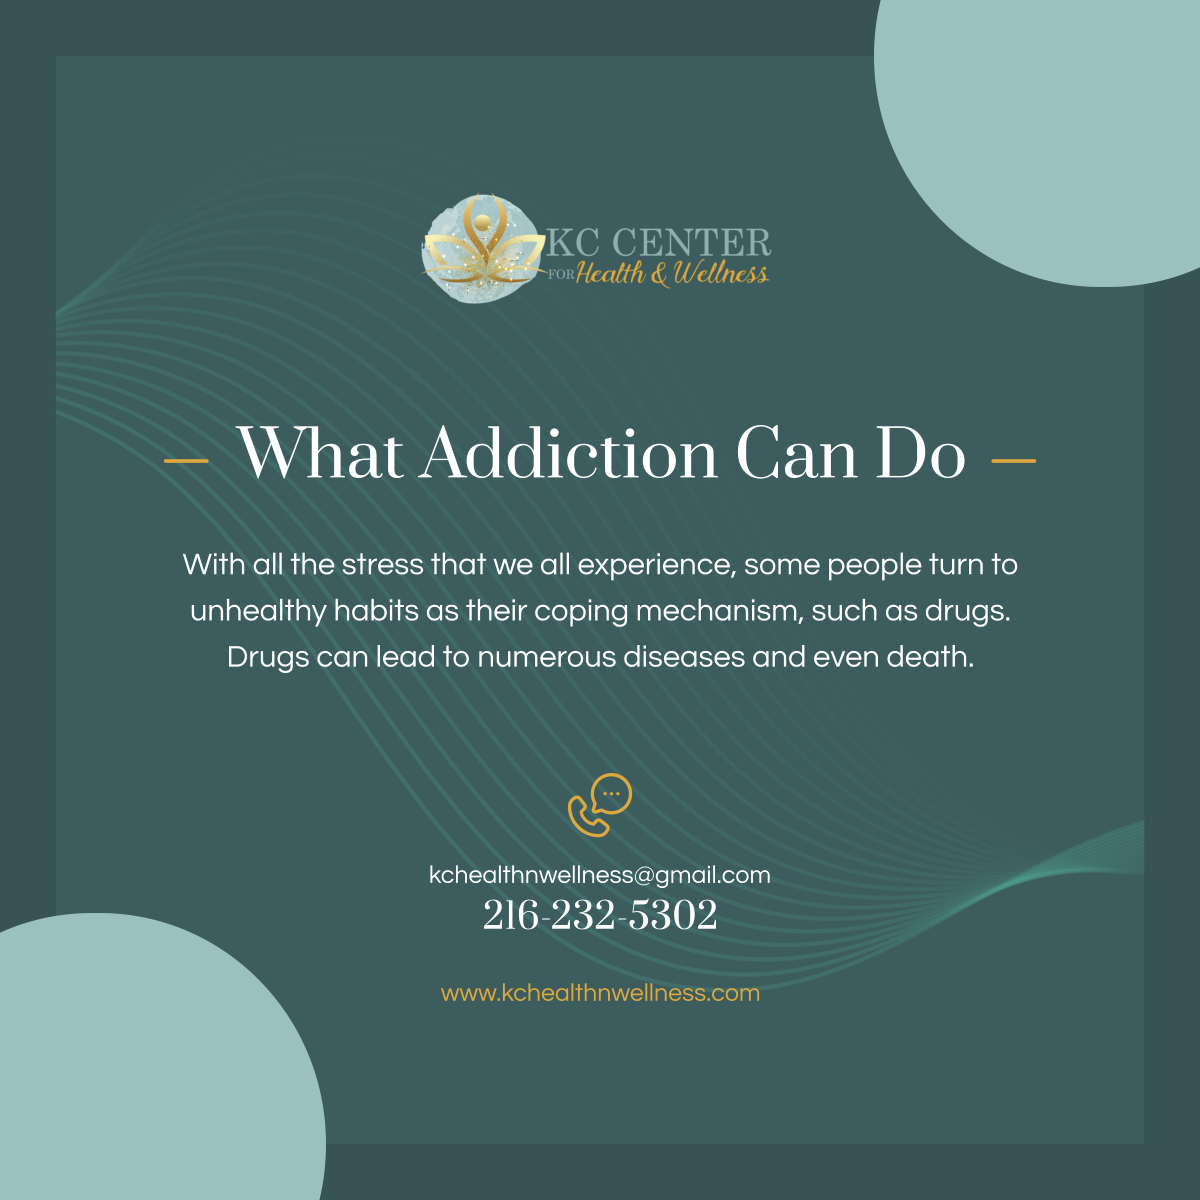 Whatever type of drug it may be, it all leads to the same fate. If you or a loved one is struggling with substance abuse, it's time to seek the help of a professional for proper treatment for their recovery. 

#DrugAddictionAwareness #SubstanceAbusePrevention #AddictionSupport